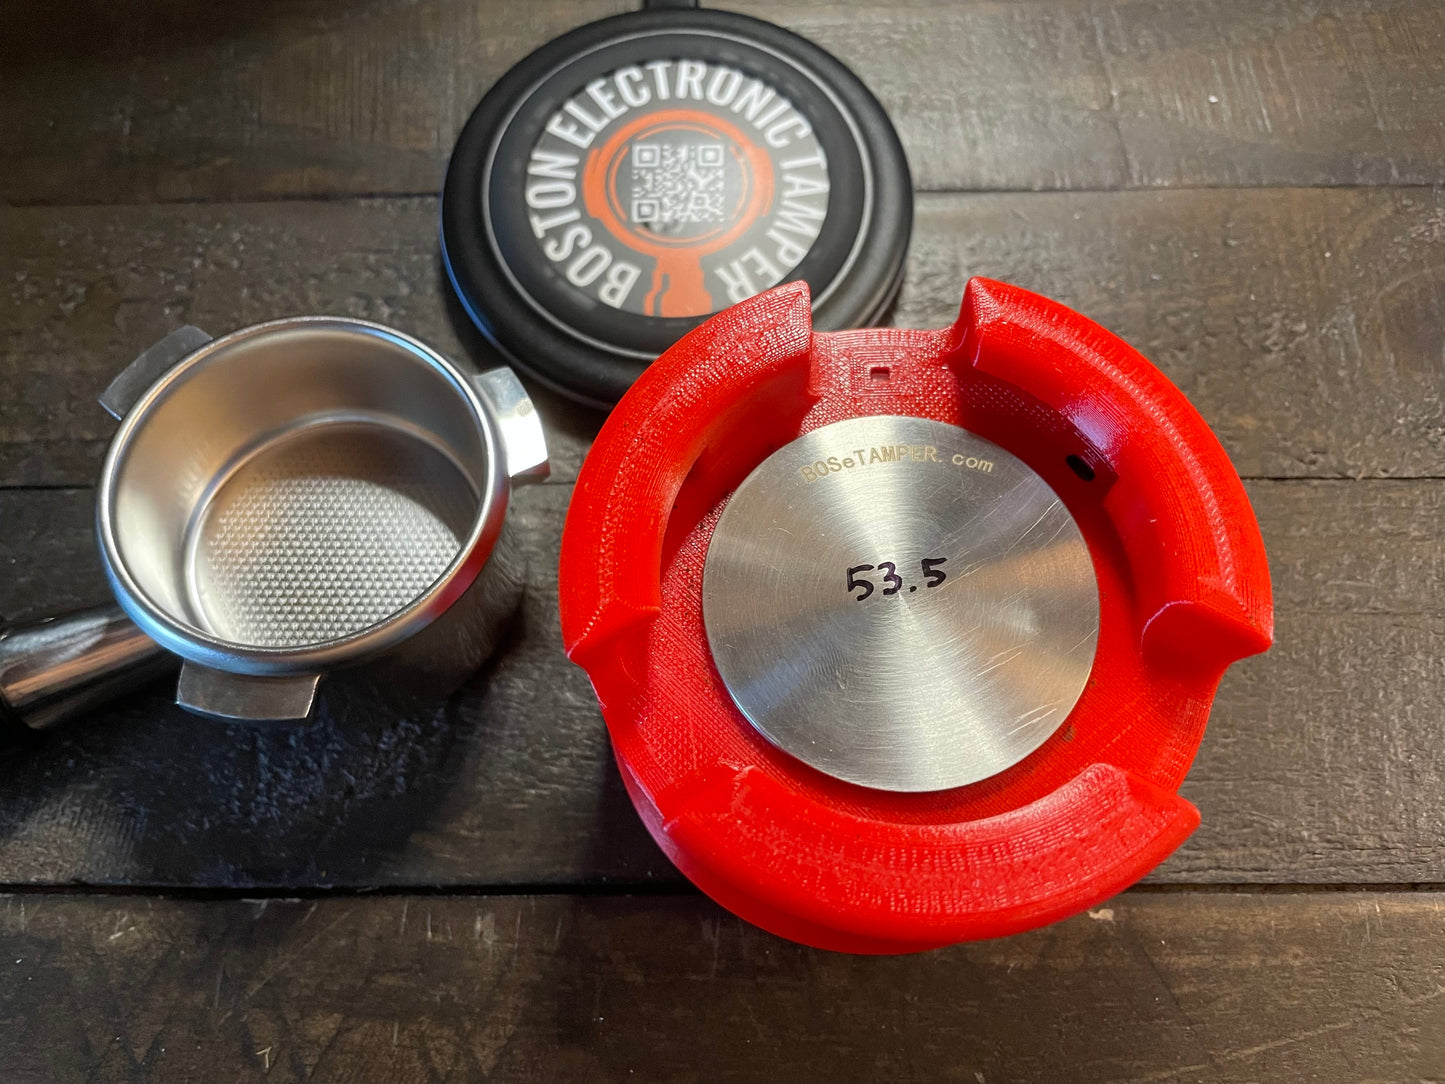 Pre-Order at least 4 weeks (please be patient) BOSeTamper for Breville and Sage - Boston Electronic Espresso Tamper 53.5mm (Patent Pending). Wireless charger pad is NOT included!